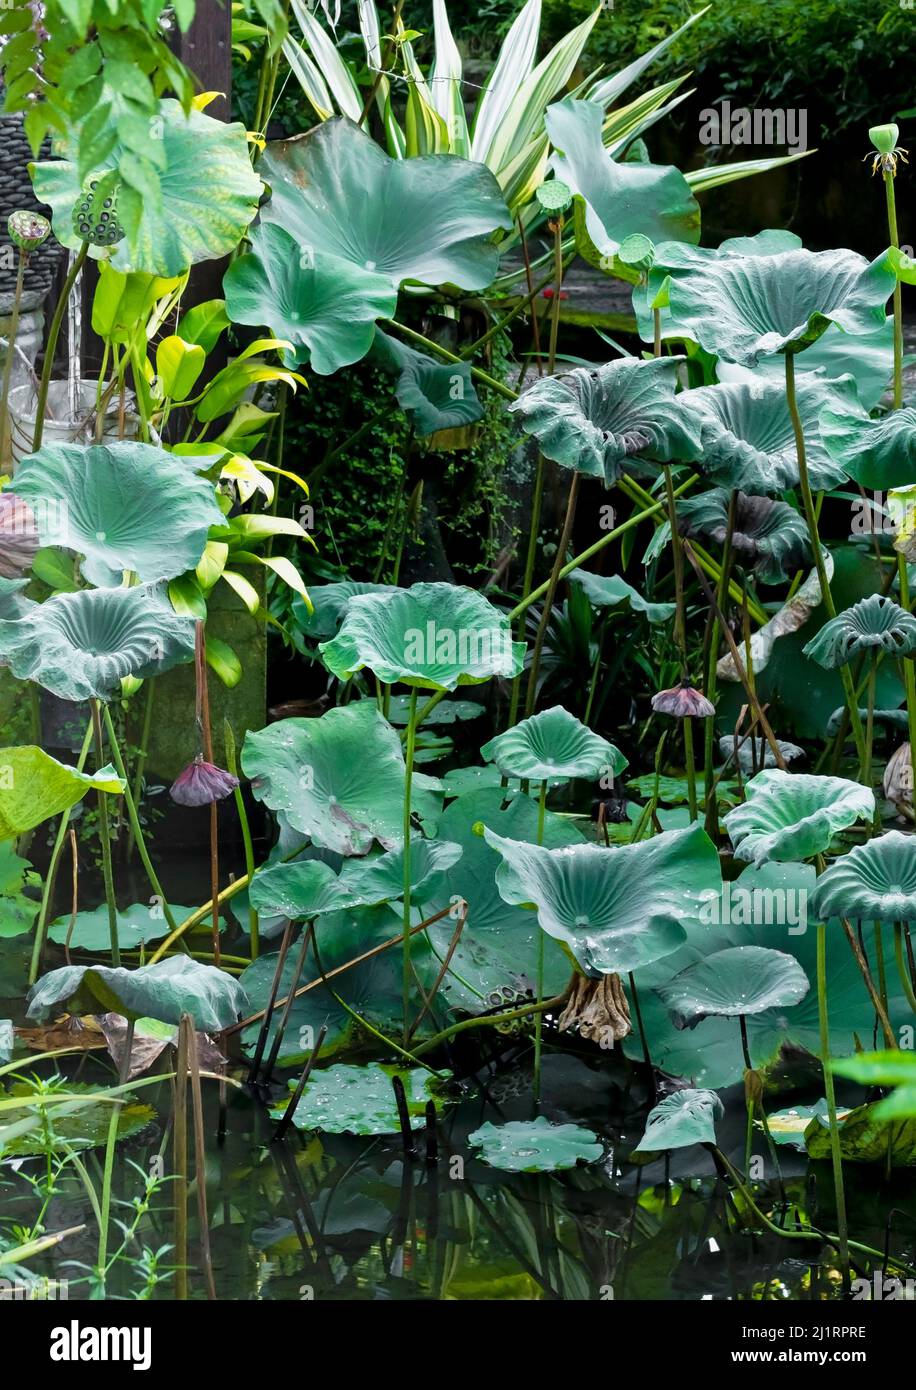 Cluster of different sizes of lotus leafs growing in pond with tropical plant background Stock Photo